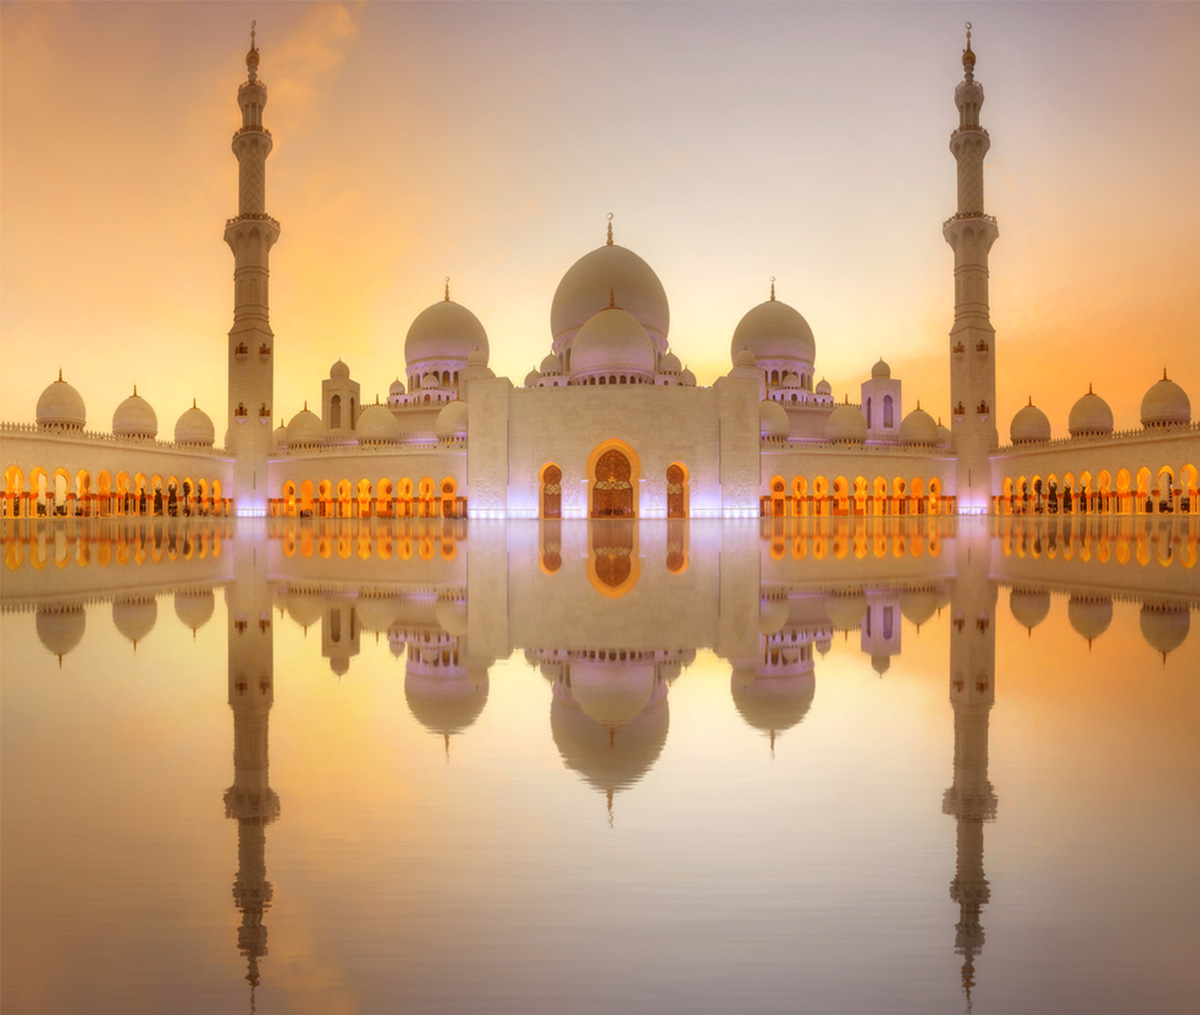 Abu Dhabi: The Middle East Destination of Your Dreams